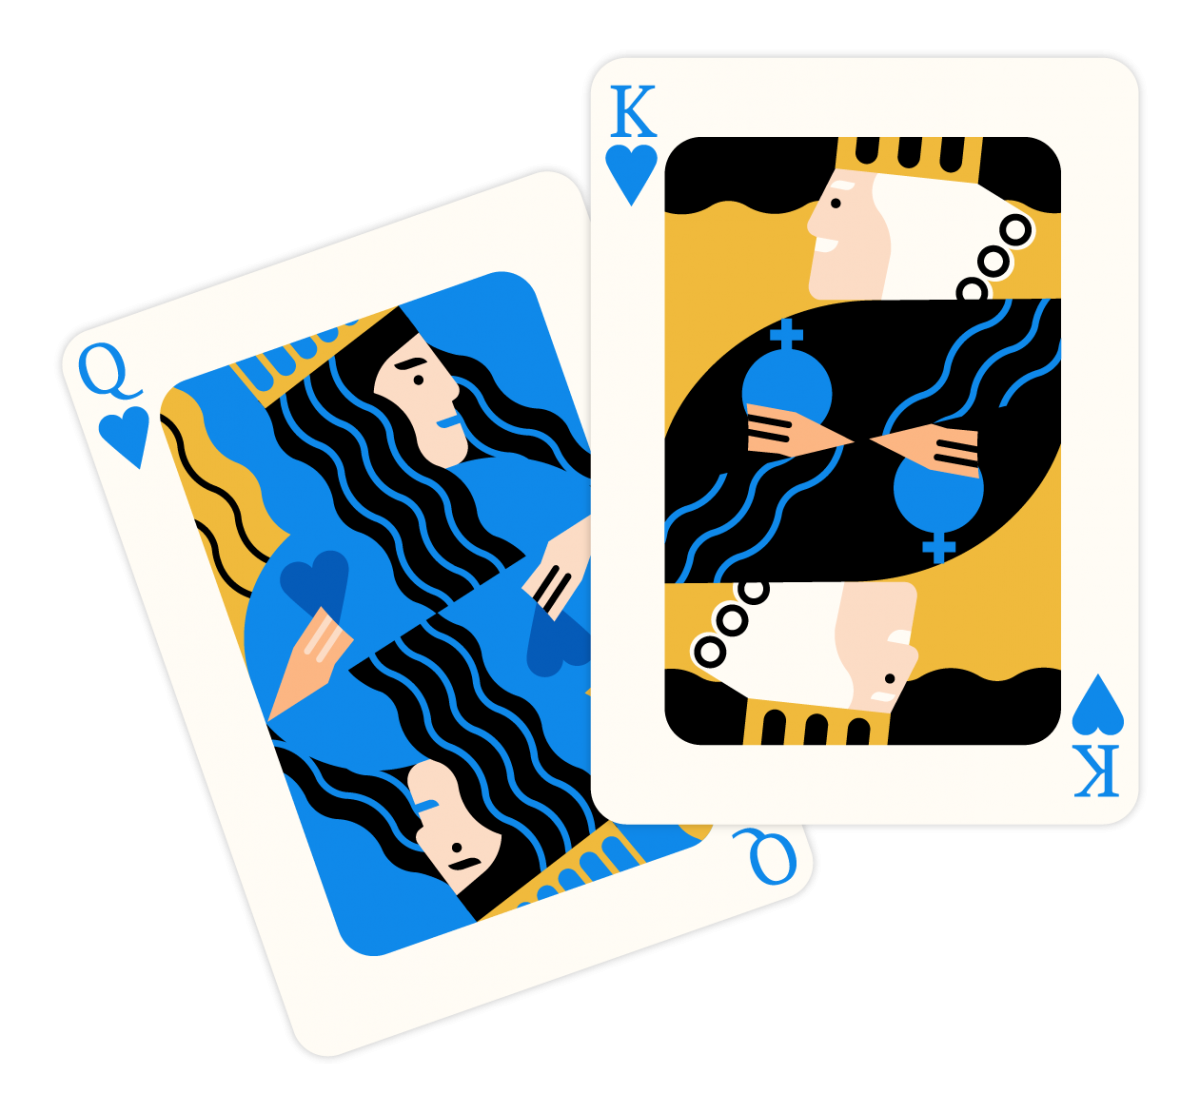 King and queen playing cards with yellow, black, blue, and white coloration.